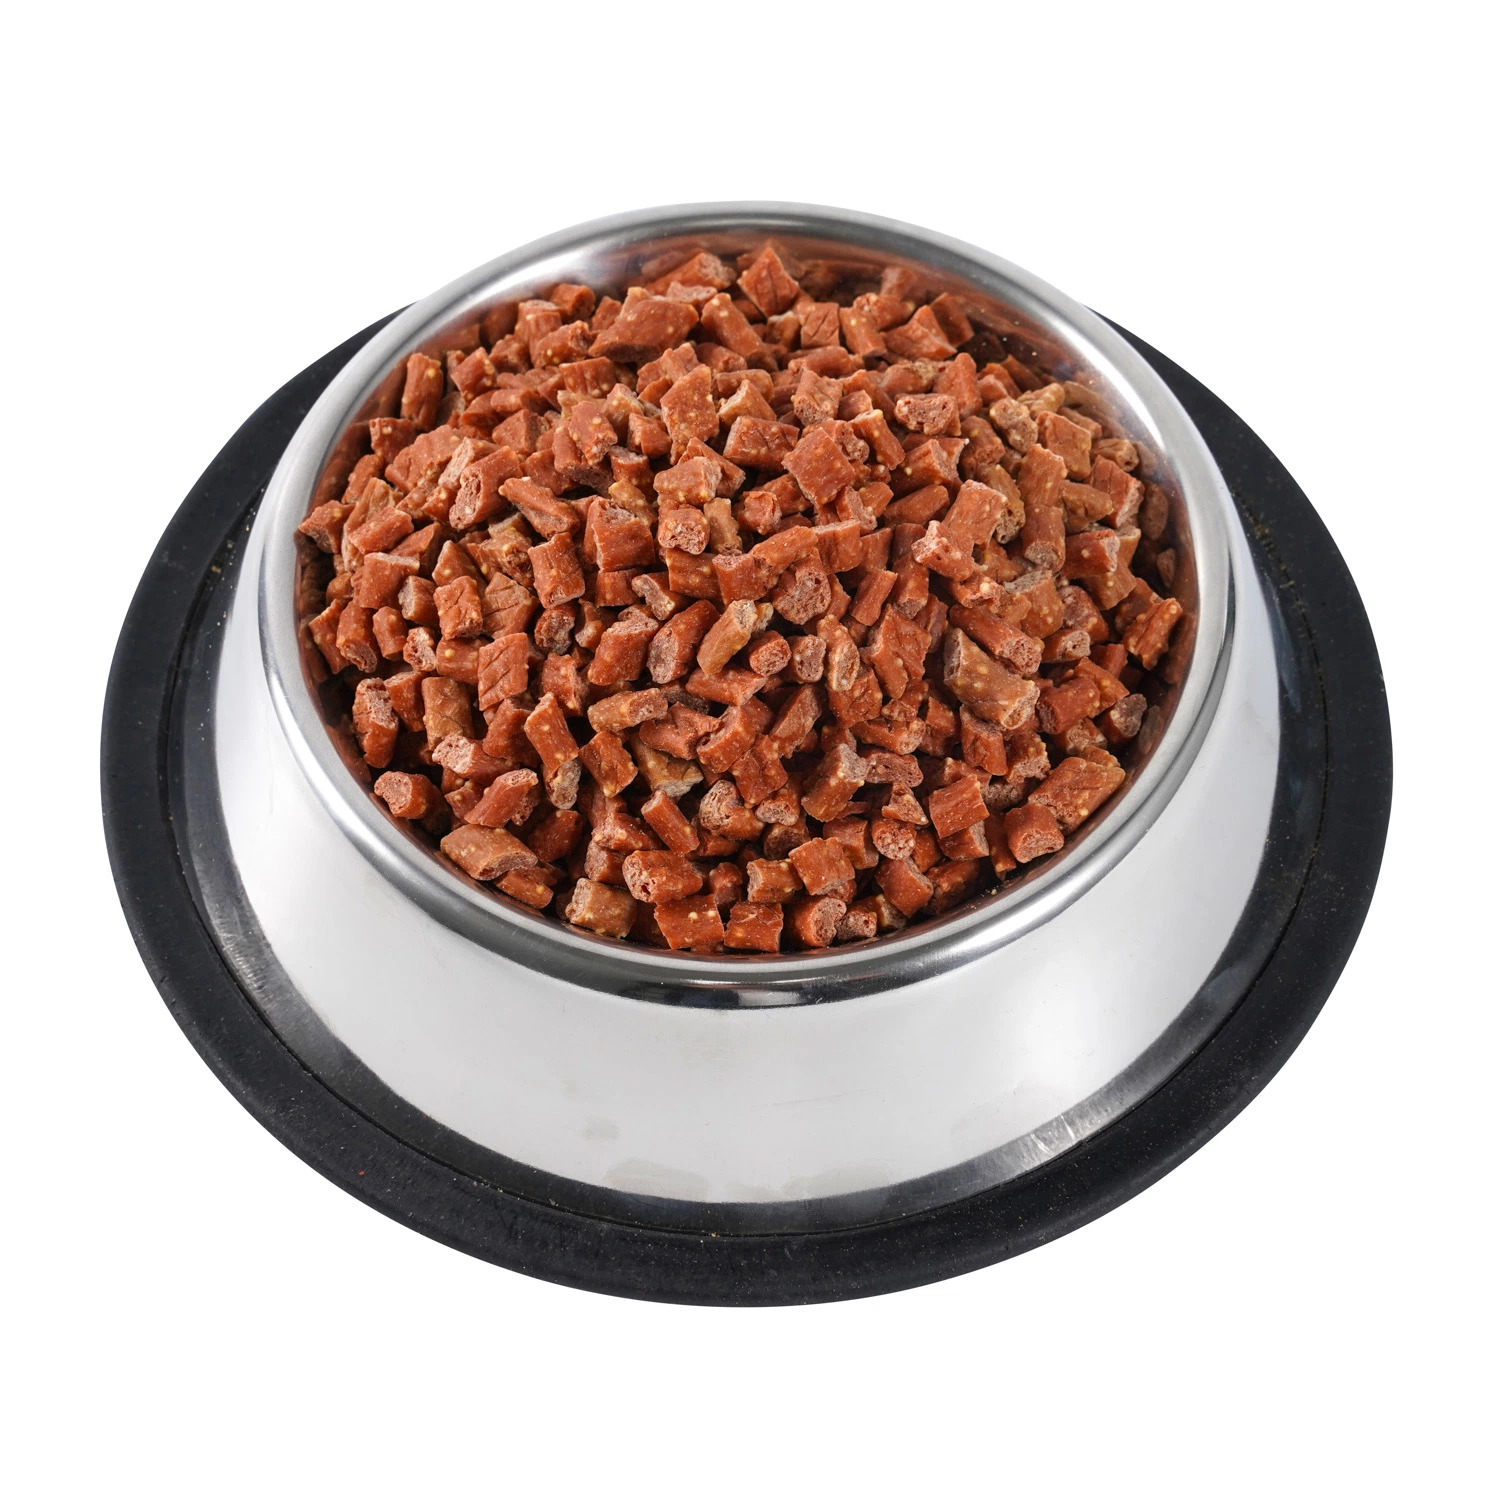 Natural Organic Safety Health Products Dried Chicken Beef Duck Pellets Pet Supply Dog Treat Snack Dried Food